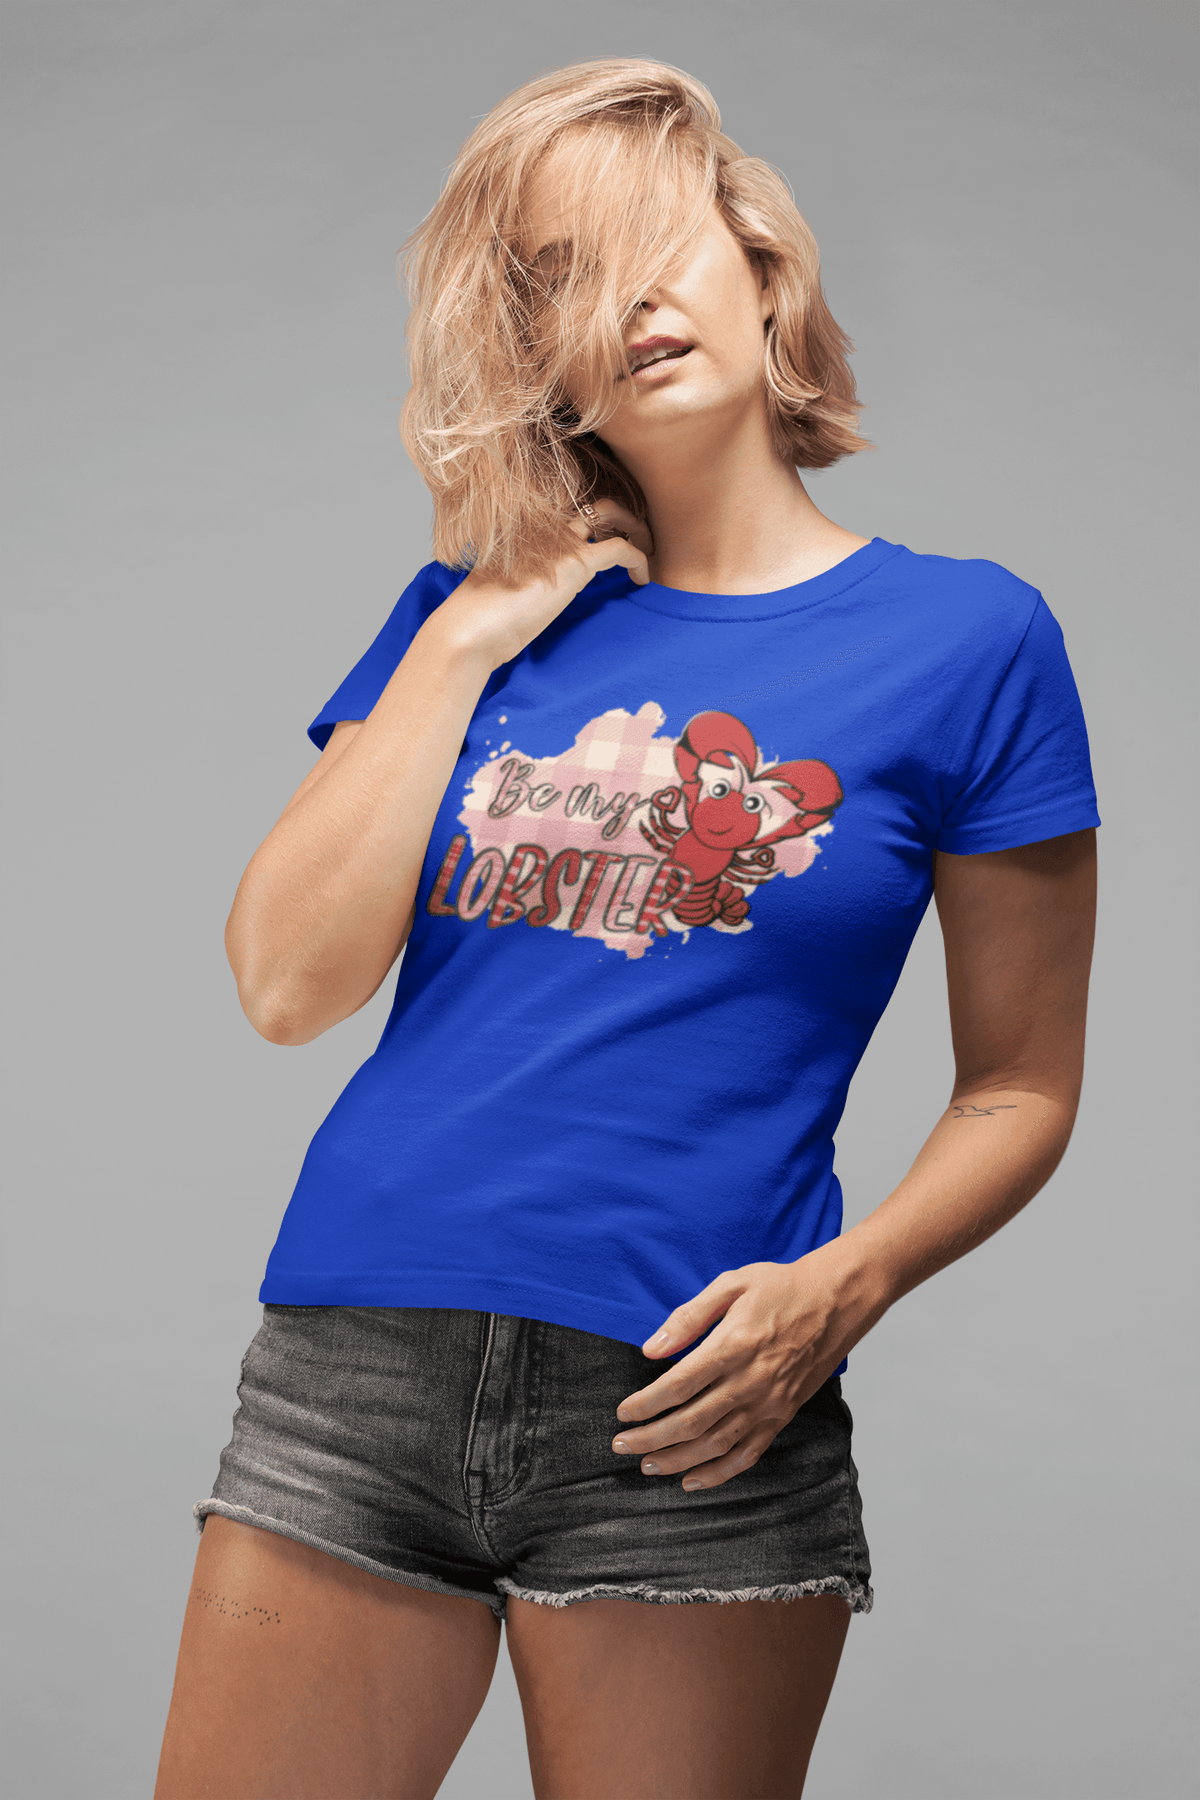 Be my LOBSTER T-shirt-Regular Fit Tee-StylinArts